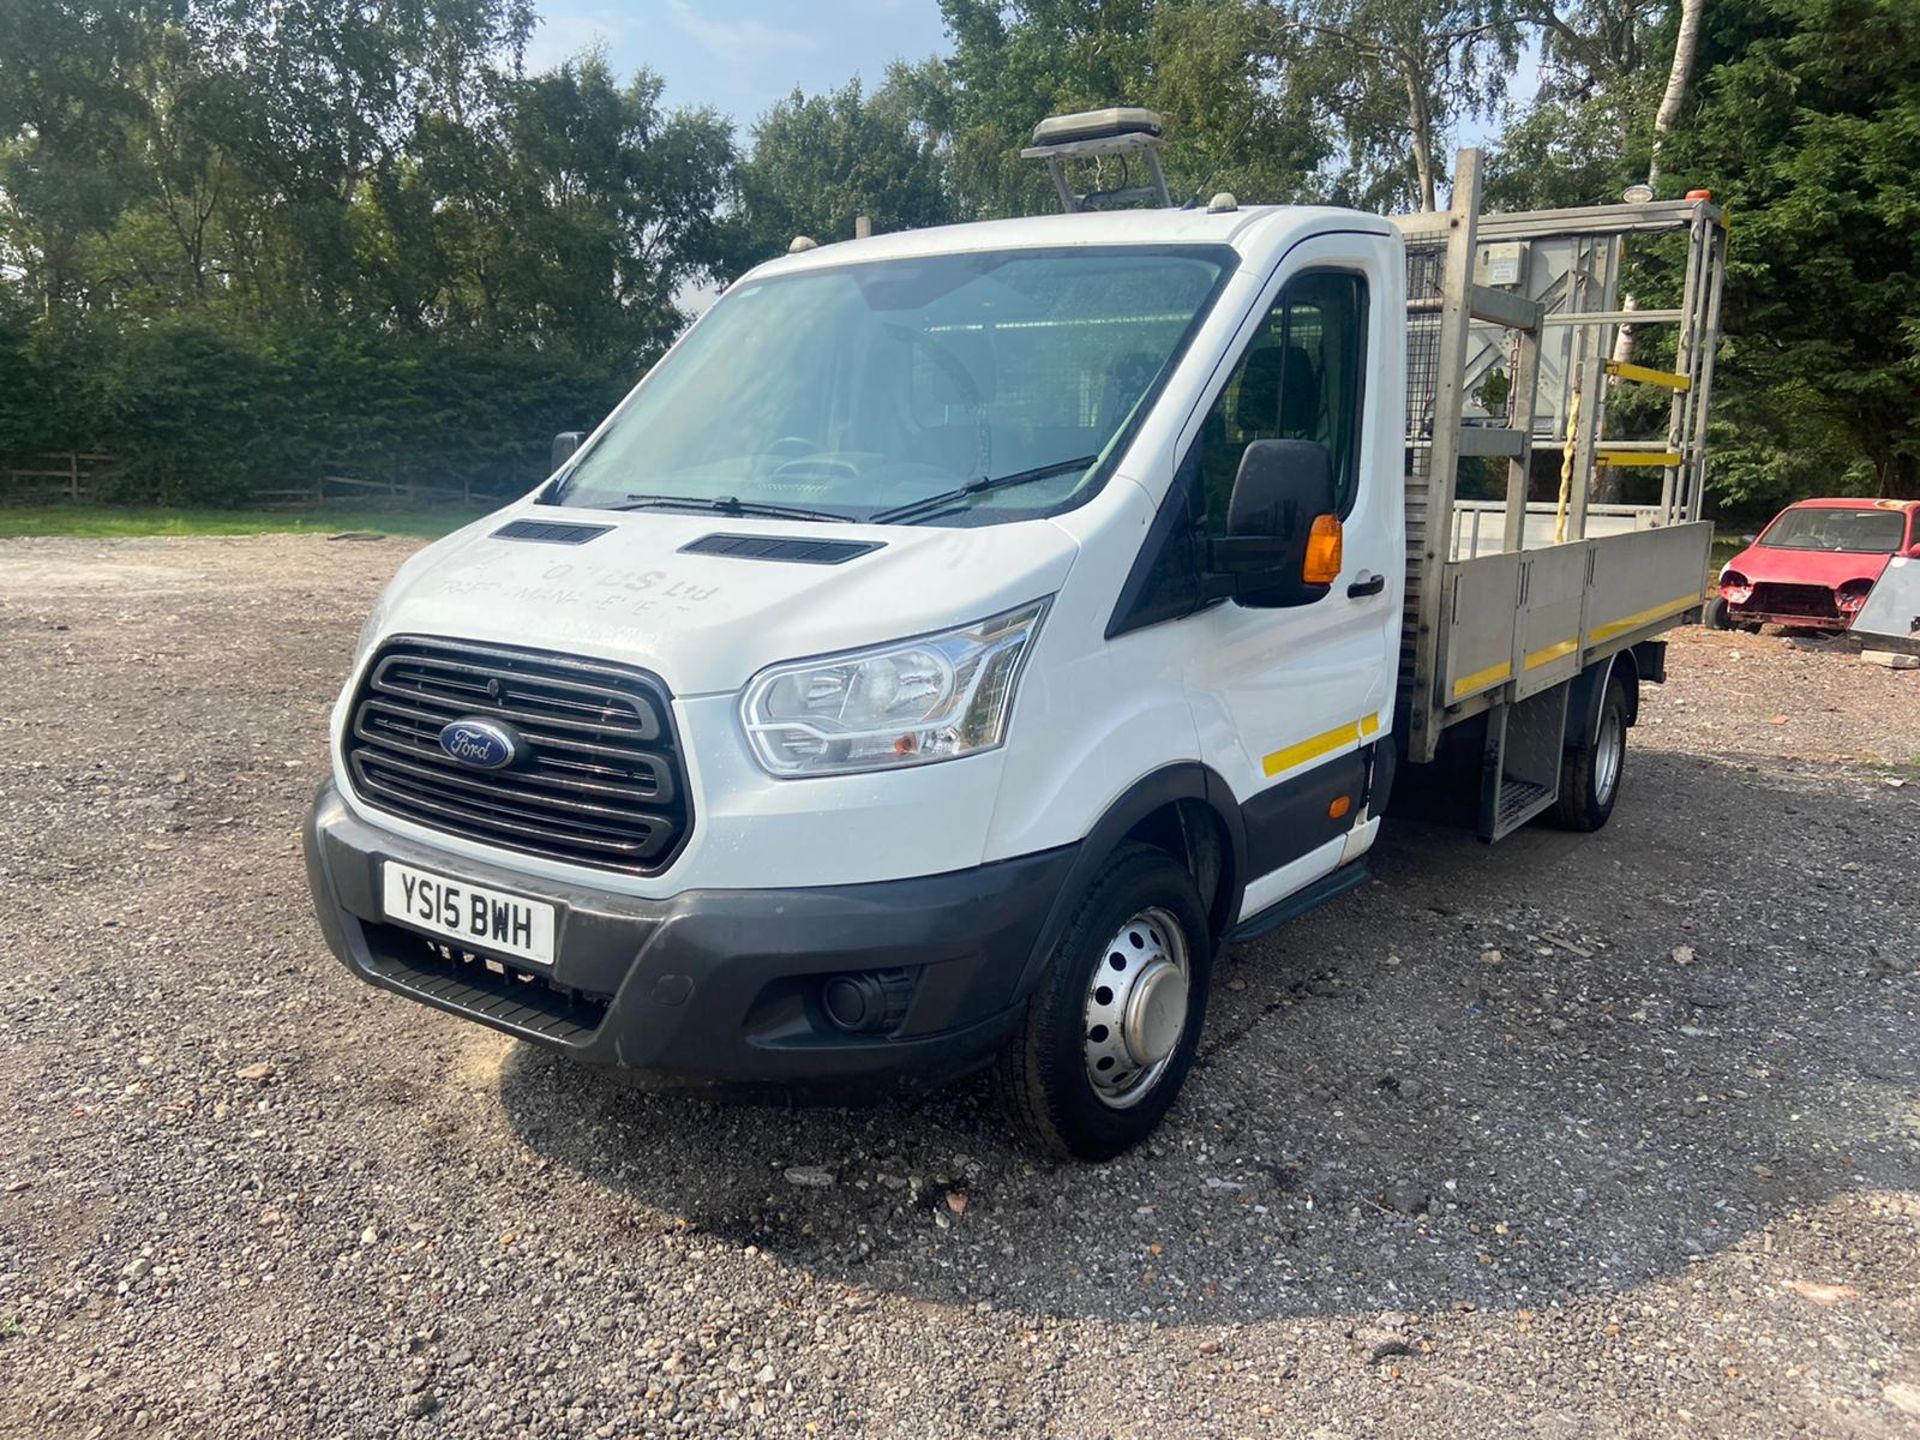 2015/15 REG FORD TRANSIT 350 WHITE DROPSIDE LORRY 2.2 DIESEL, SHOWING 0 FORMER KEEPERS *PLUS VAT* - Image 3 of 10